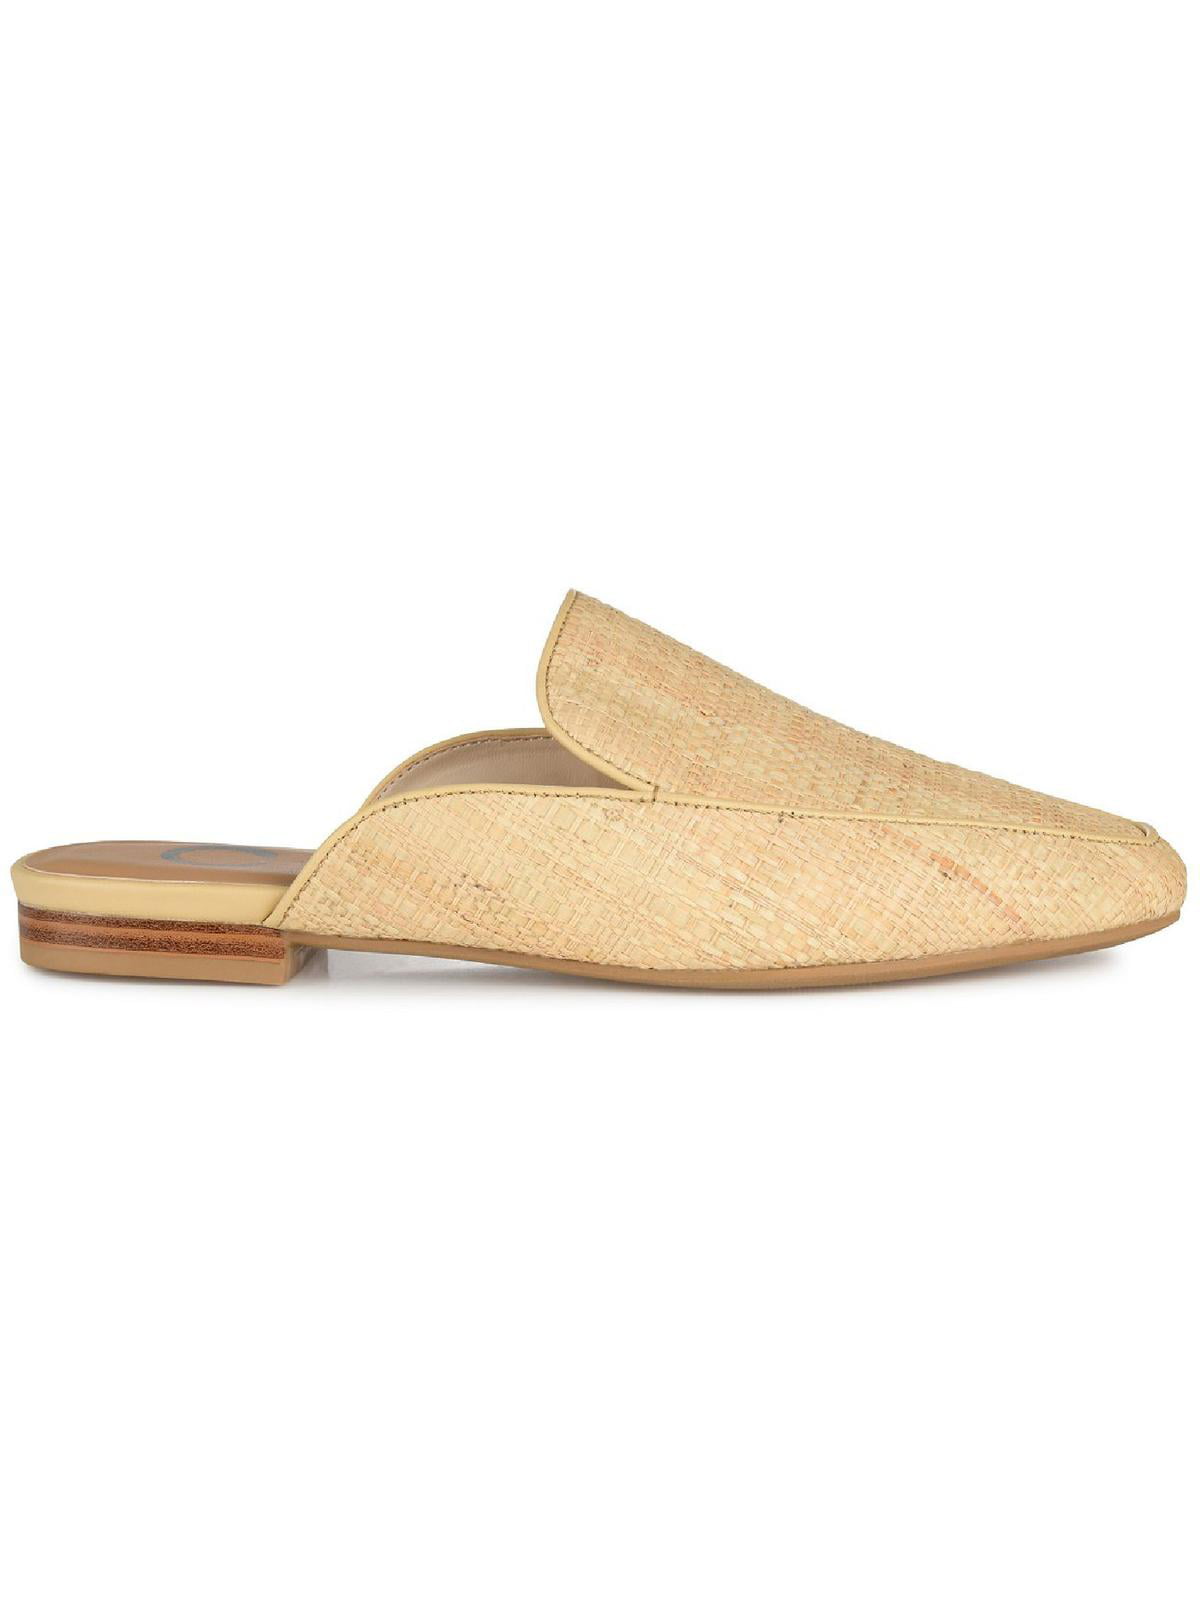 Journee Collection Womens Akza Slip On Square Toe Mules Flats 